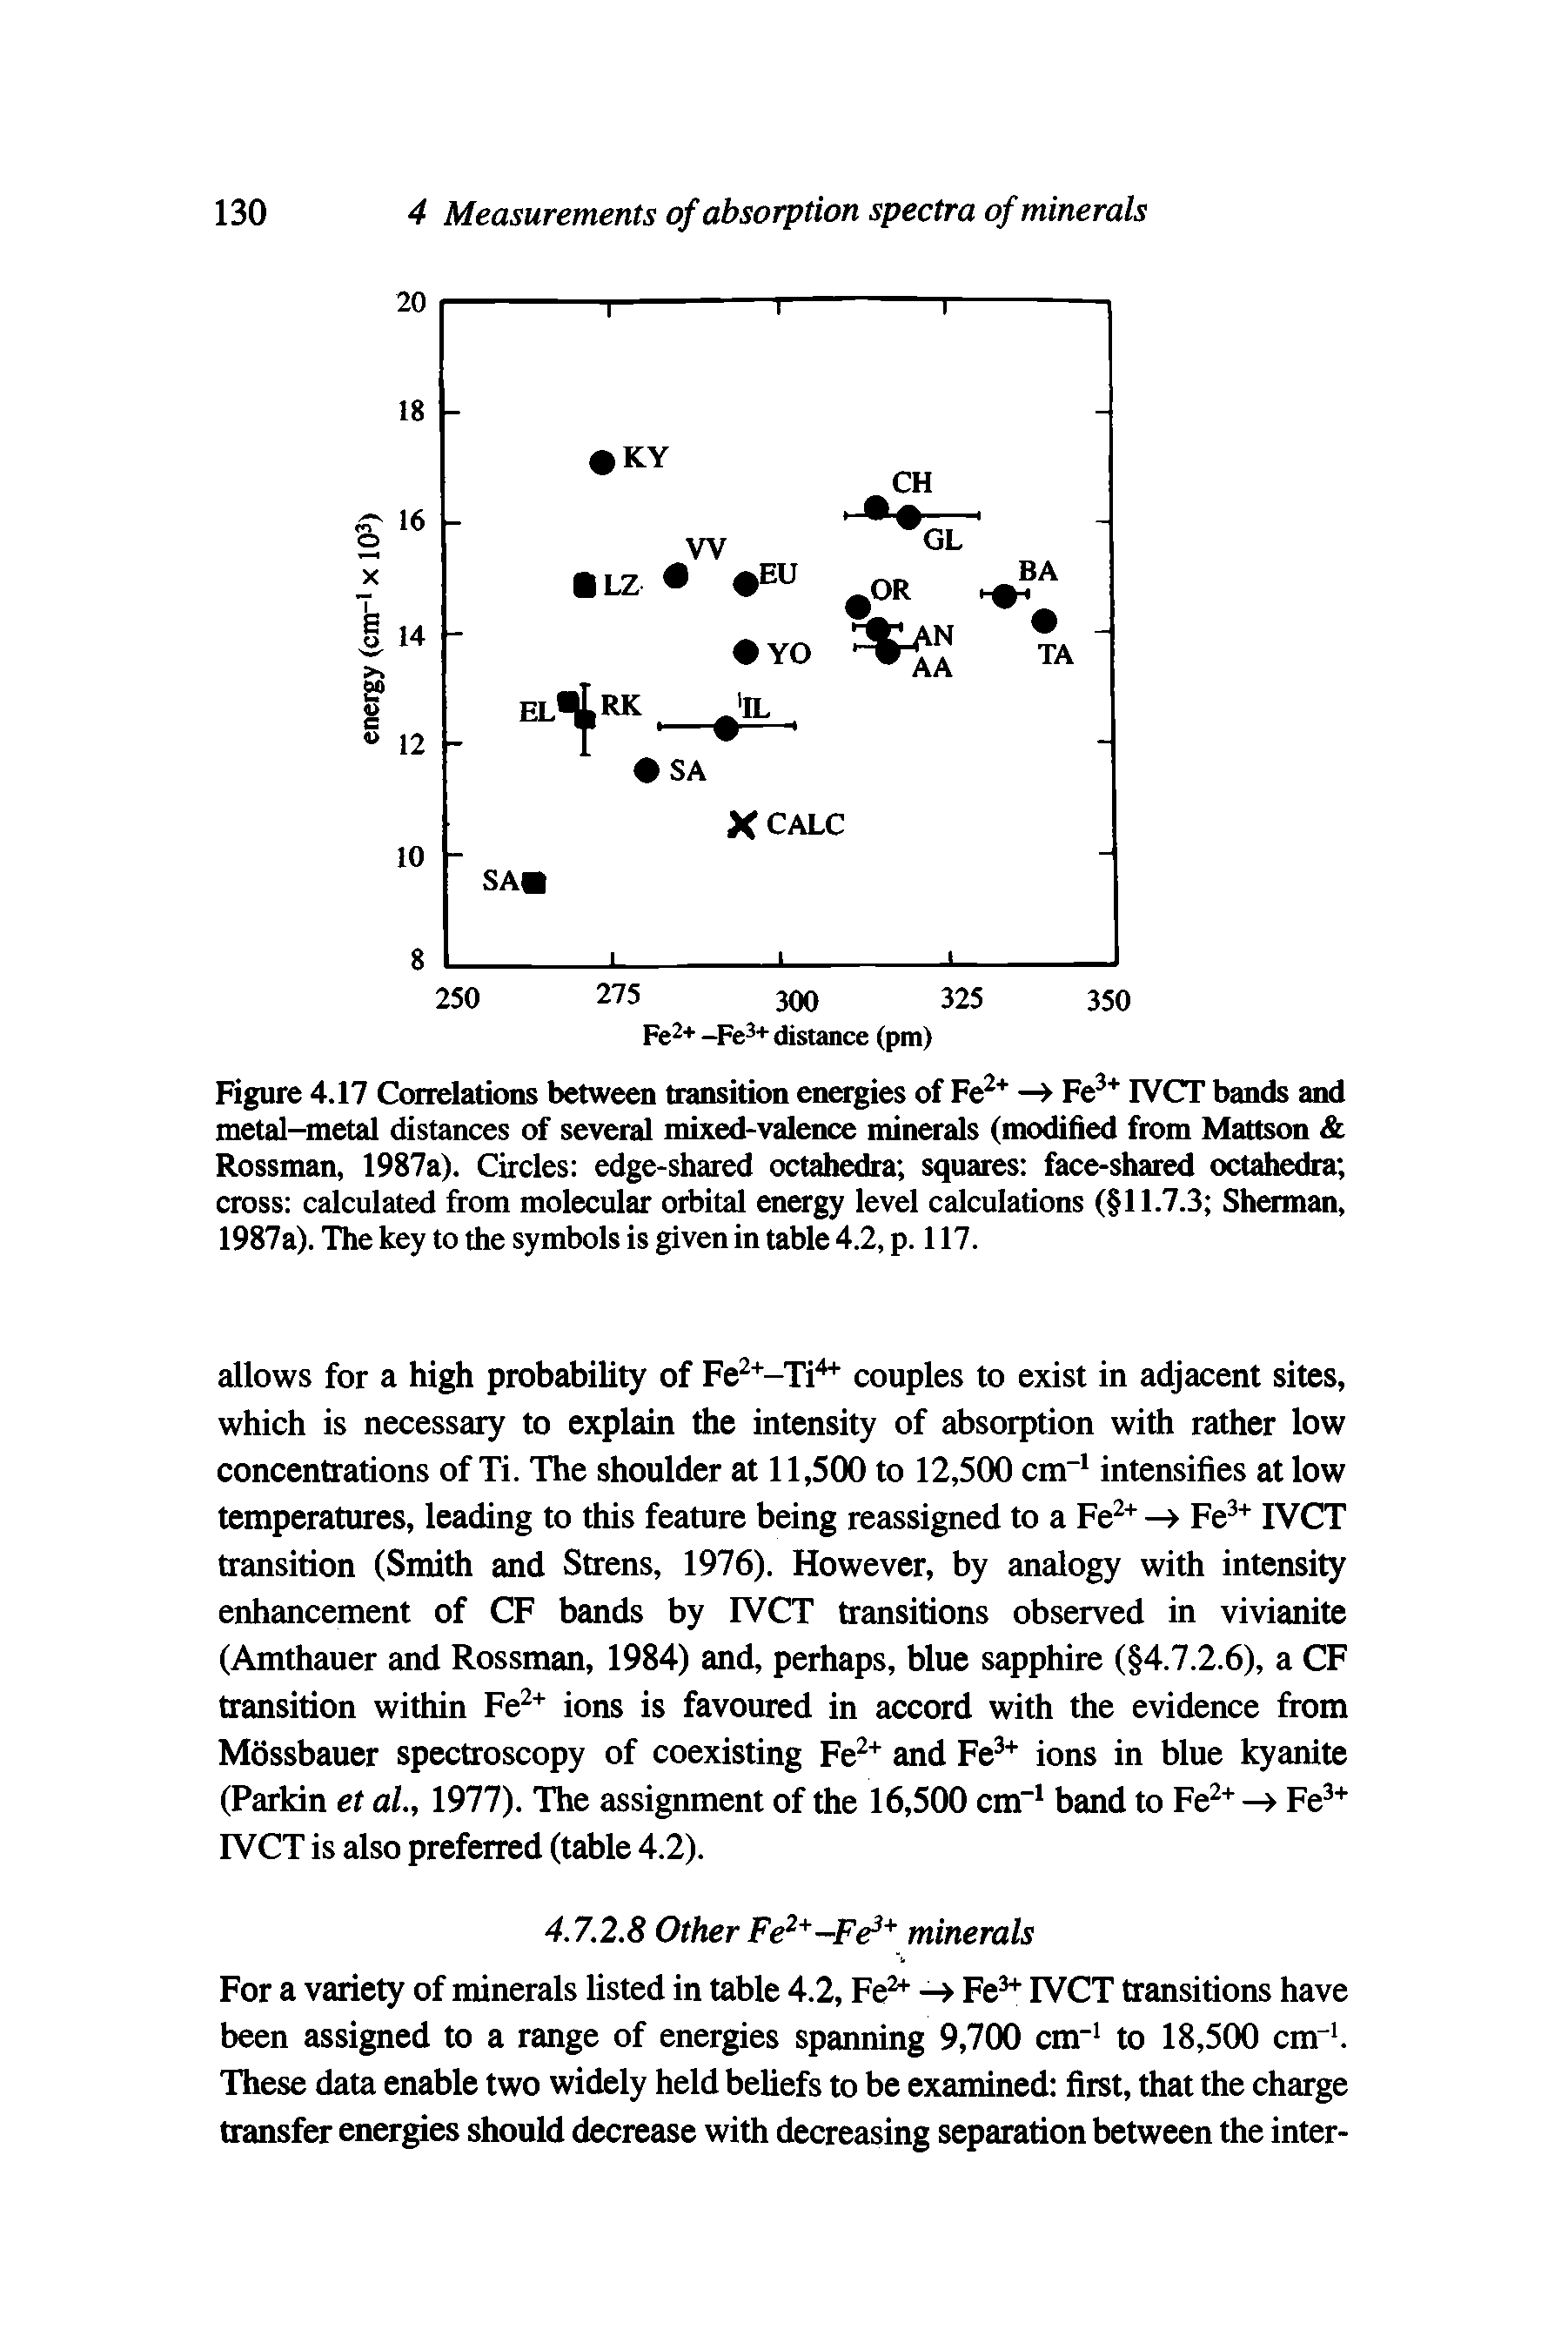 Figure 4.17 Correlations between transition energies of Fe2+ — Fe3+ IVCT bands and metal-metal distances of several mixed-valence minerals (modified from Mattson Rossman, 1987a). Circles edge-shared octahedra squares face-shared octahedra cross calculated from molecular orbital energy level calculations ( 11.7.3 Sherman, 1987a). The key to the symbols is given in table 4.2, p. 117.